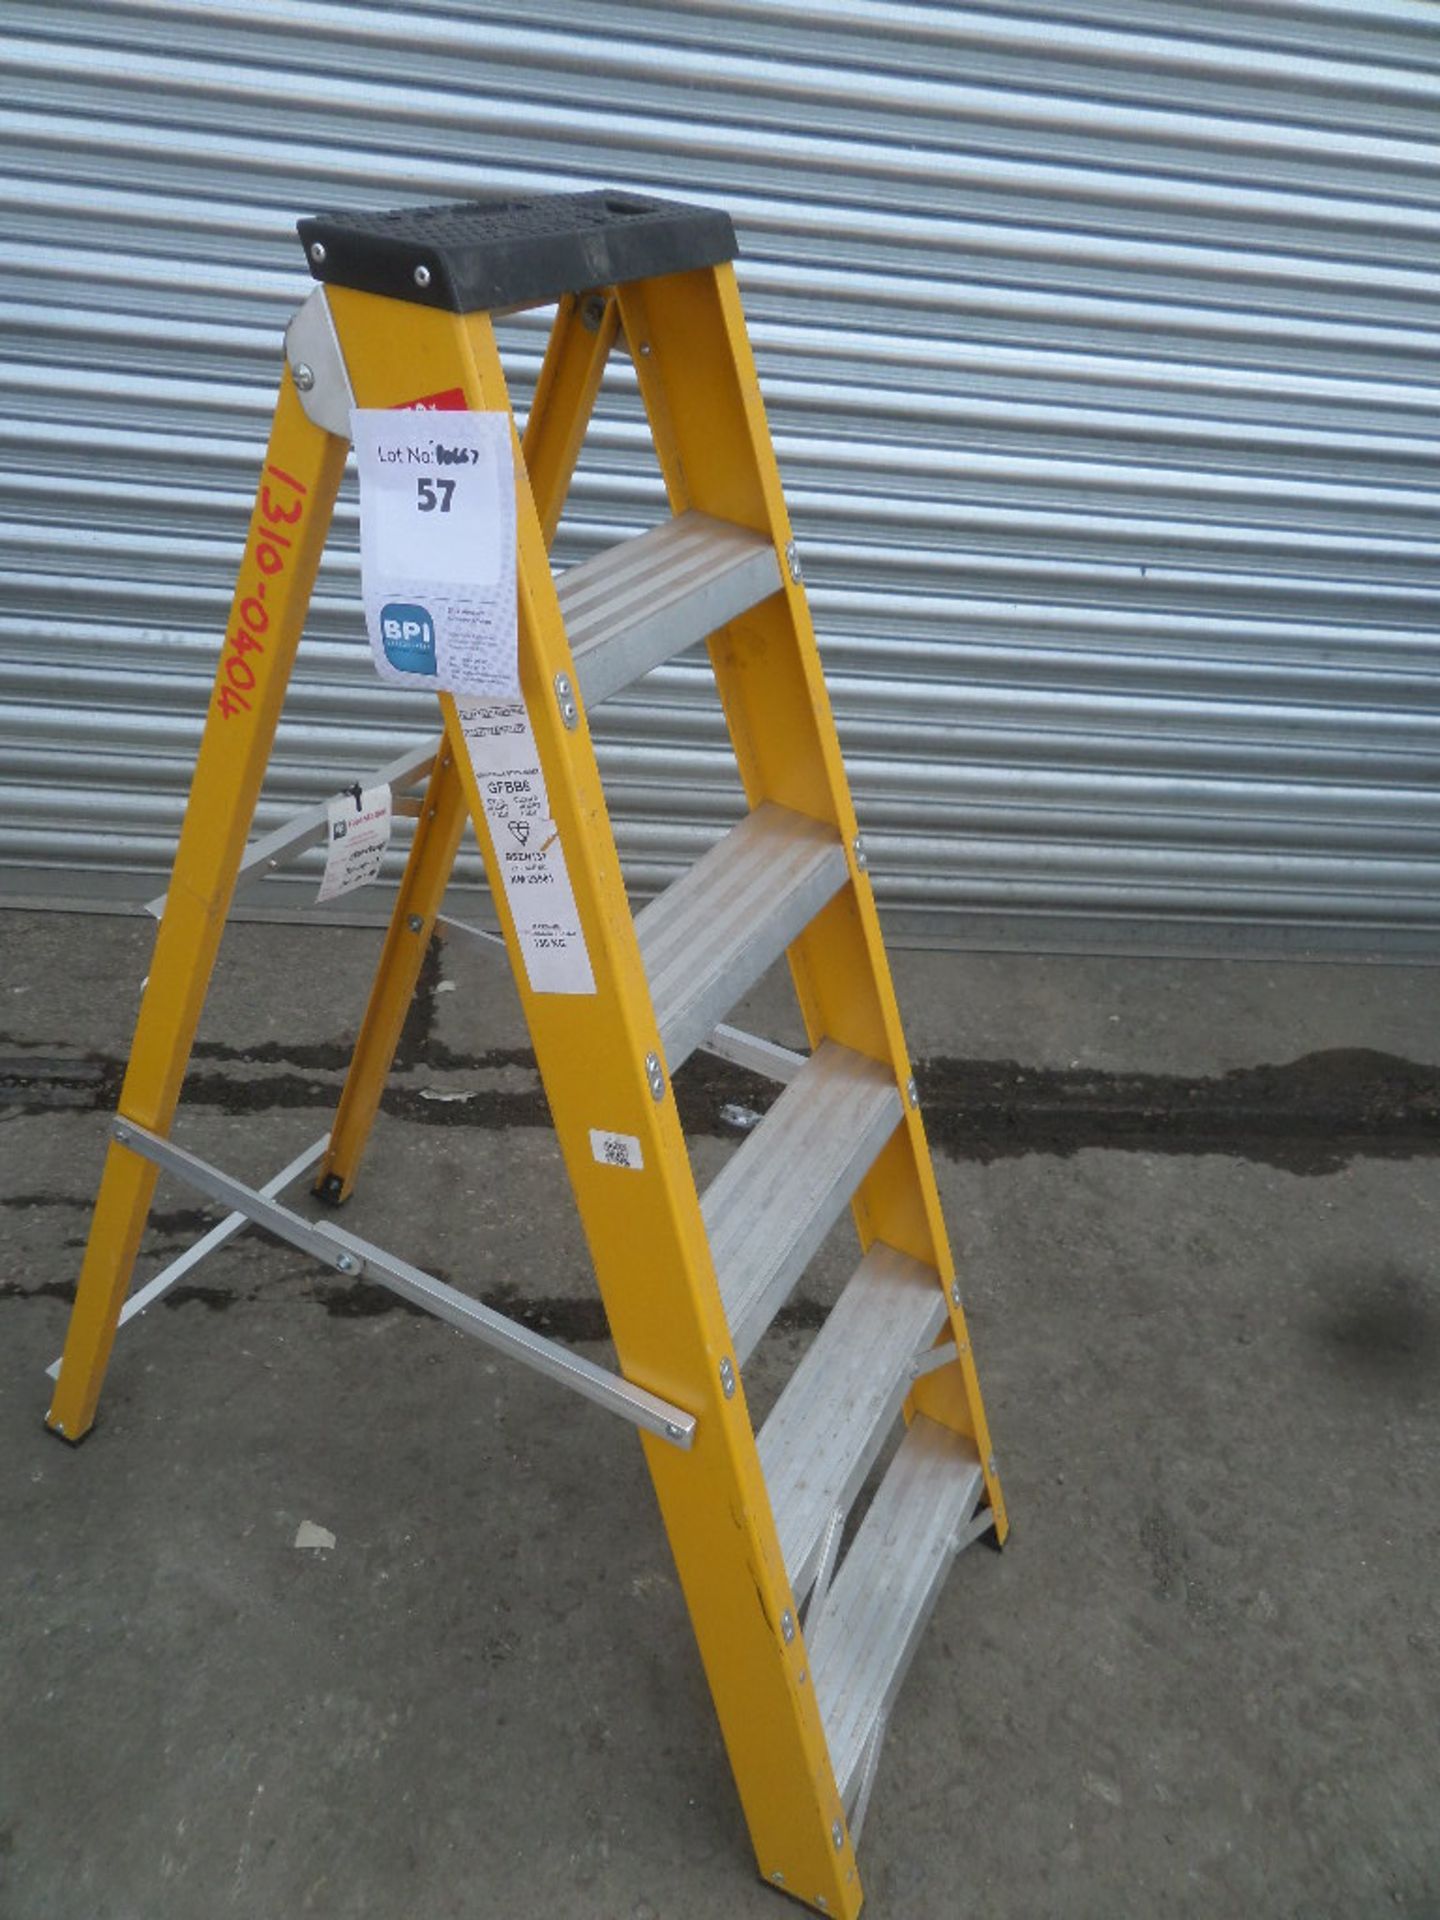 UNKNOWN  {027195} FIBERGLASS STEP LADDERS - 6 TREAD Top tread is 122cm when open - tested and are wo